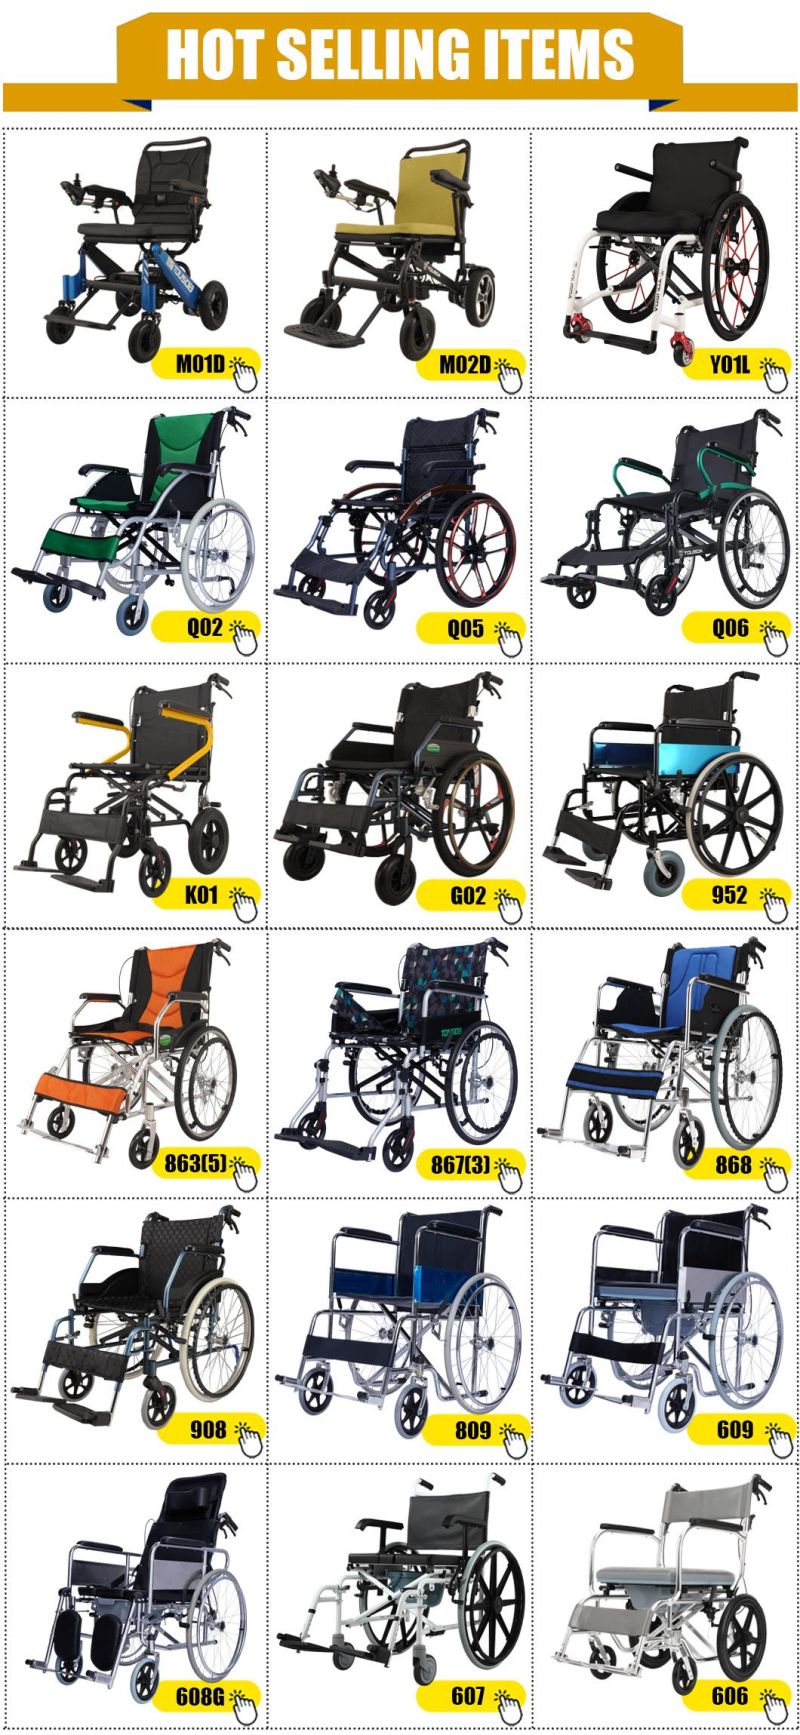 CE Brushless Motor Lithium Ion Battery Folding Manual Wheelchairs for The Elderly Indoor and Outdoor